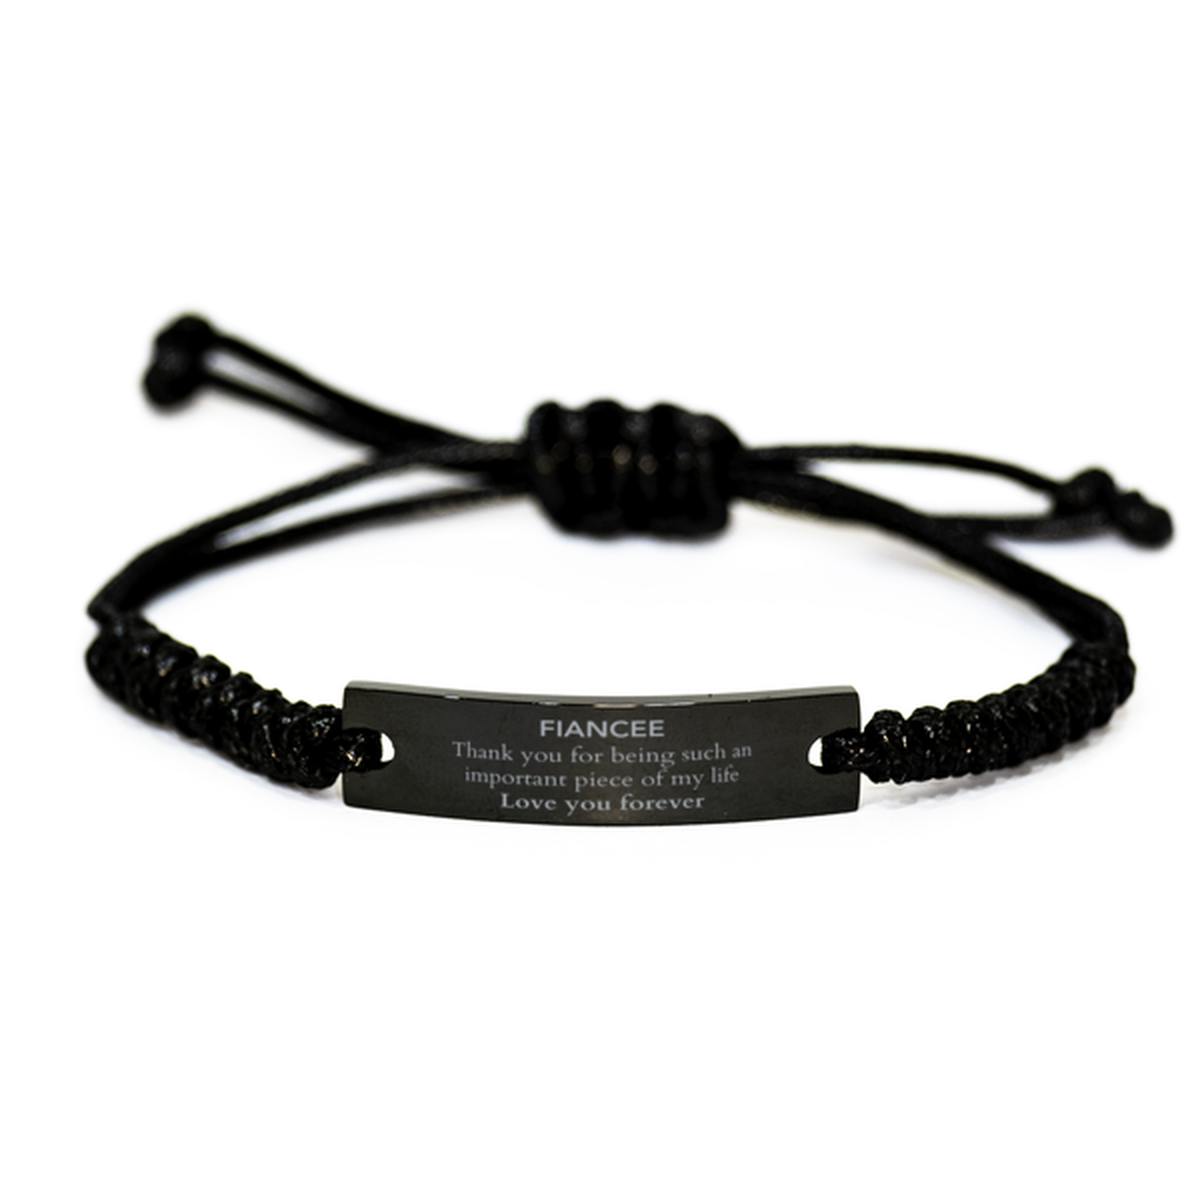 Appropriate Fiancee Black Rope Bracelet Epic Birthday Gifts for Fiancee Thank you for being such an important piece of my life Fiancee Christmas Mothers Fathers Day